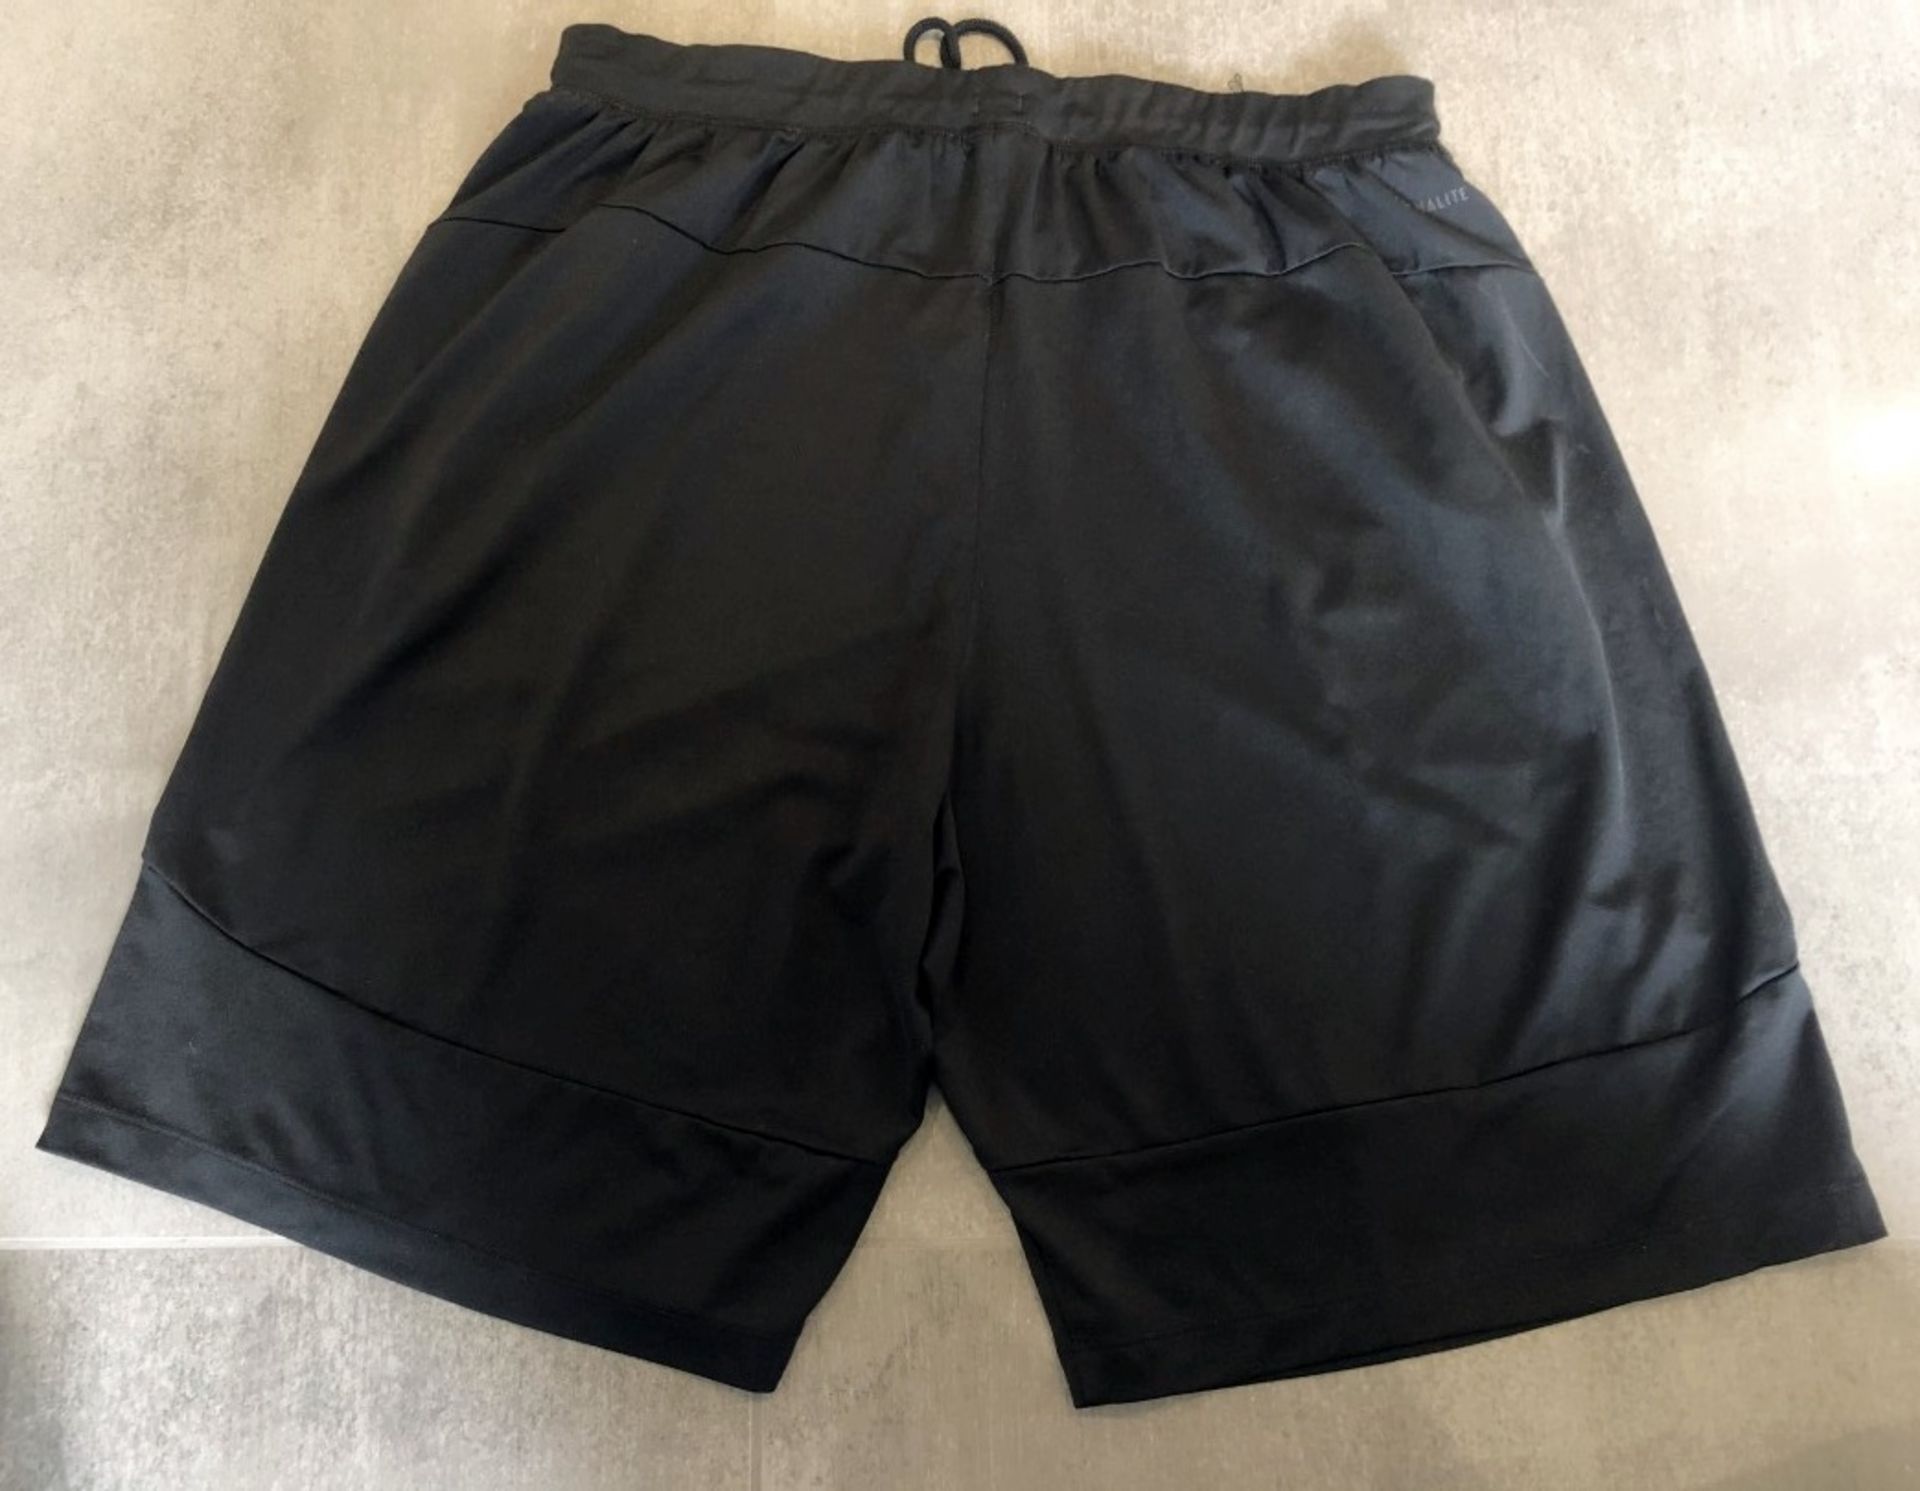 4 x Assorted Pairs Of Men's Genuine Adidas Shorts - AllIn Black - Sizes: L-XL - Preowned - Image 2 of 23